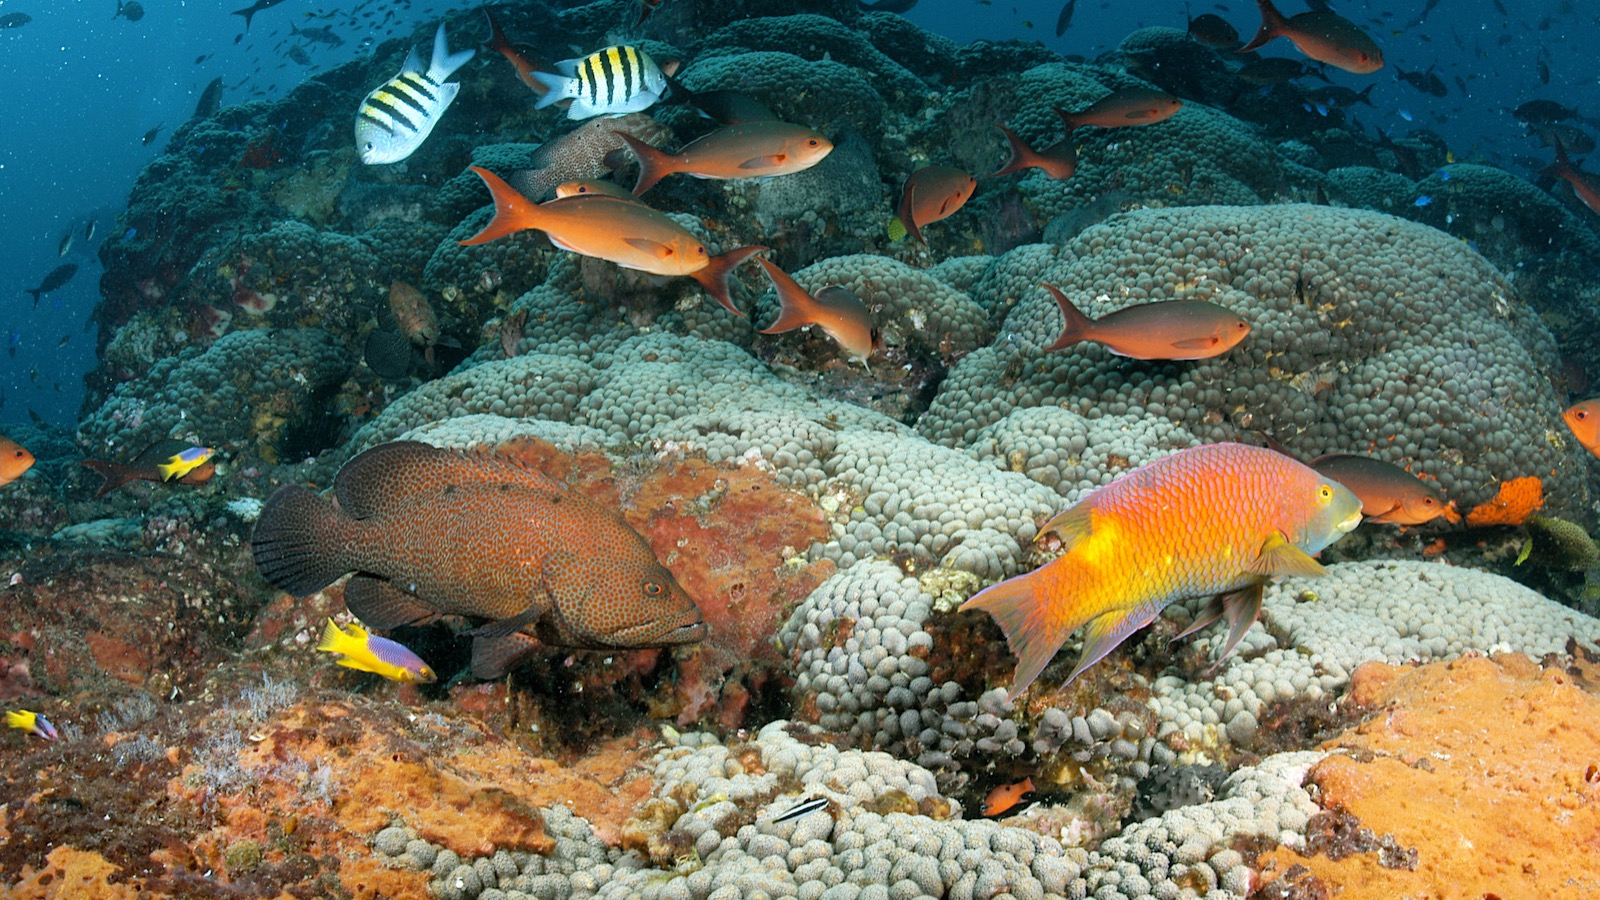 Fish over a vibrant coral reef